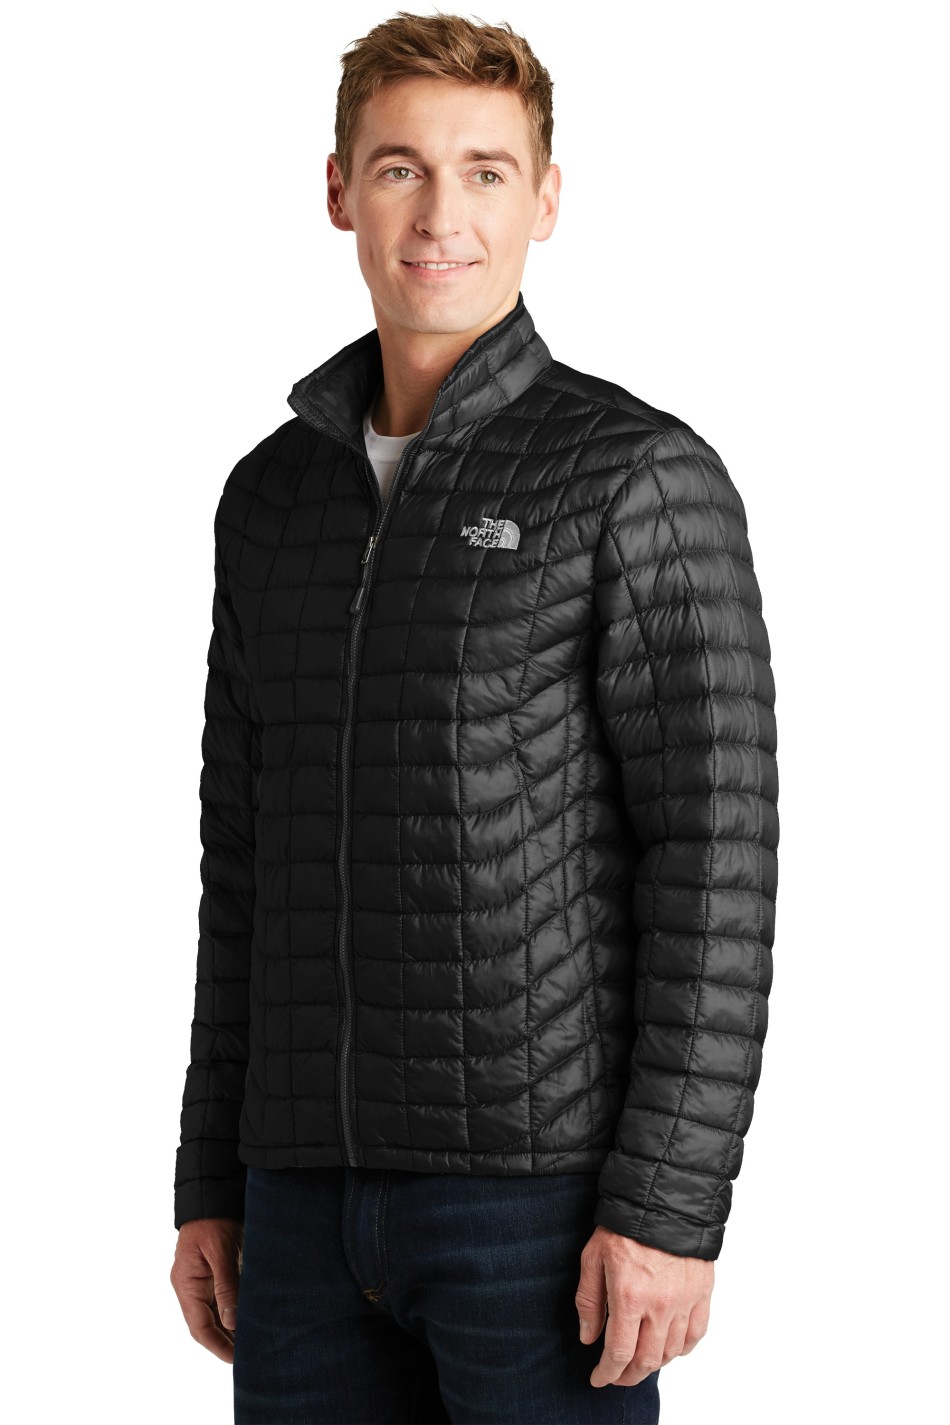 north face thermoball mens coat